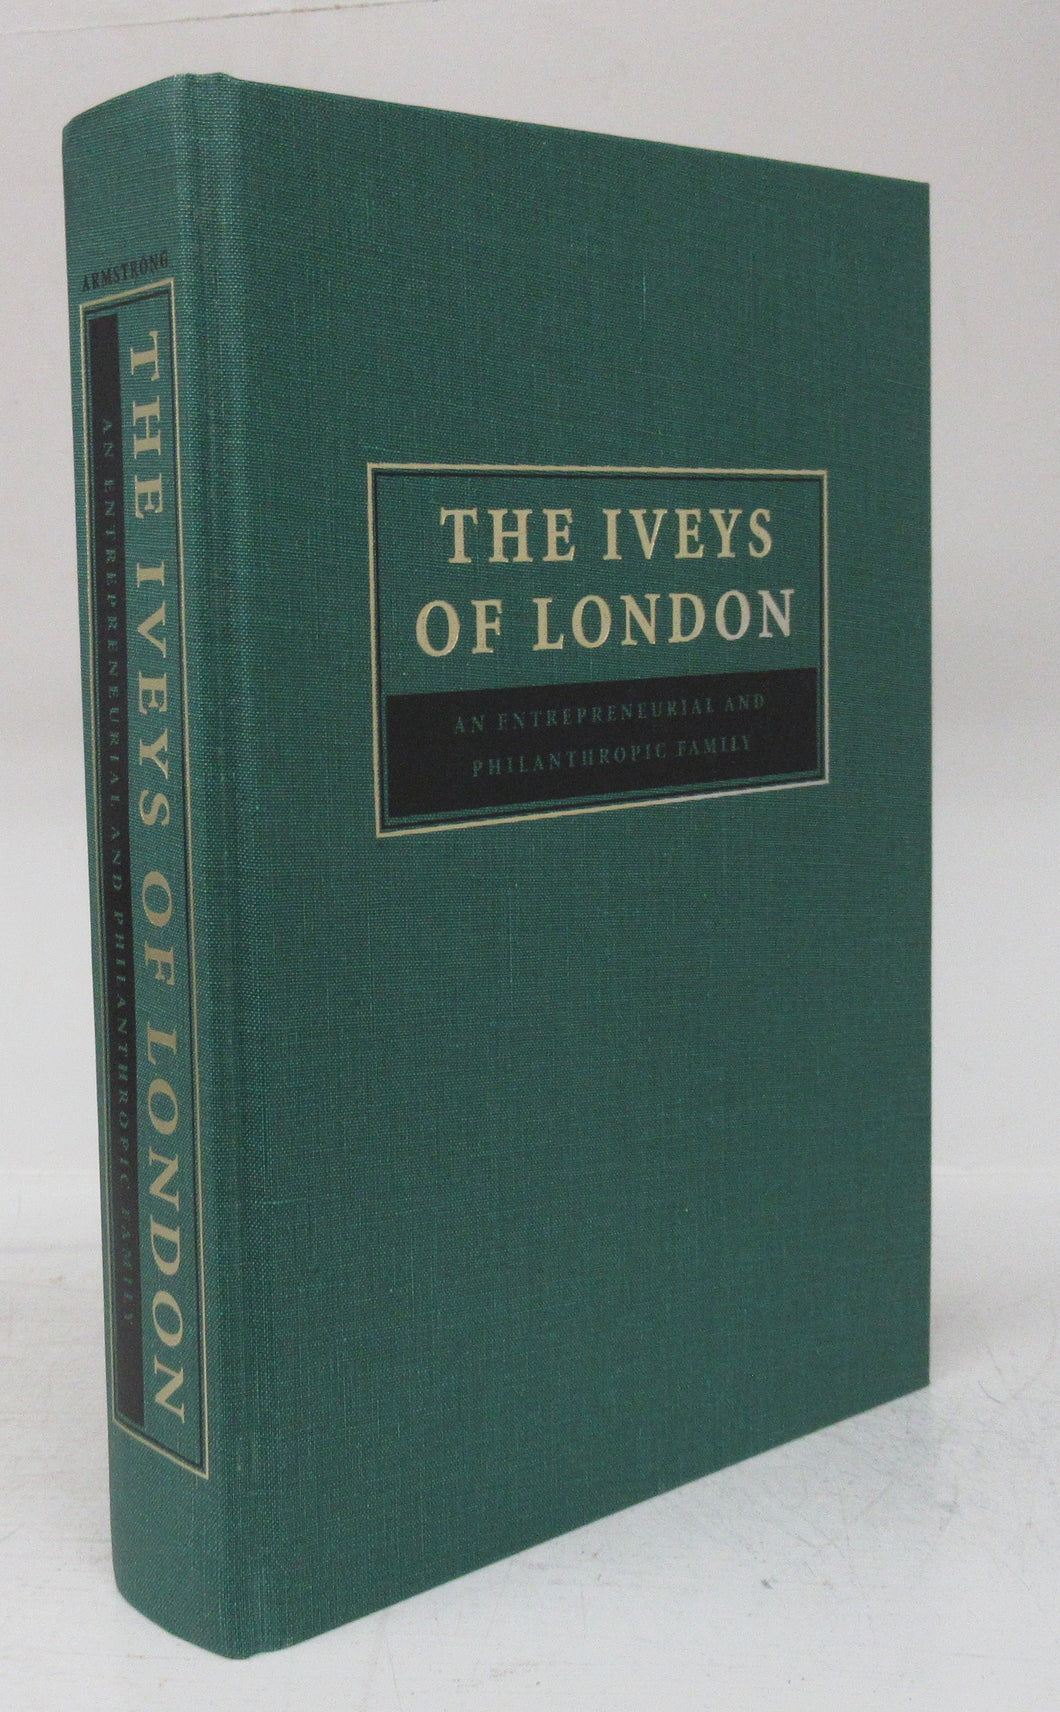 The Iveys of London: An Entrepreneurial and Philanthropic Family